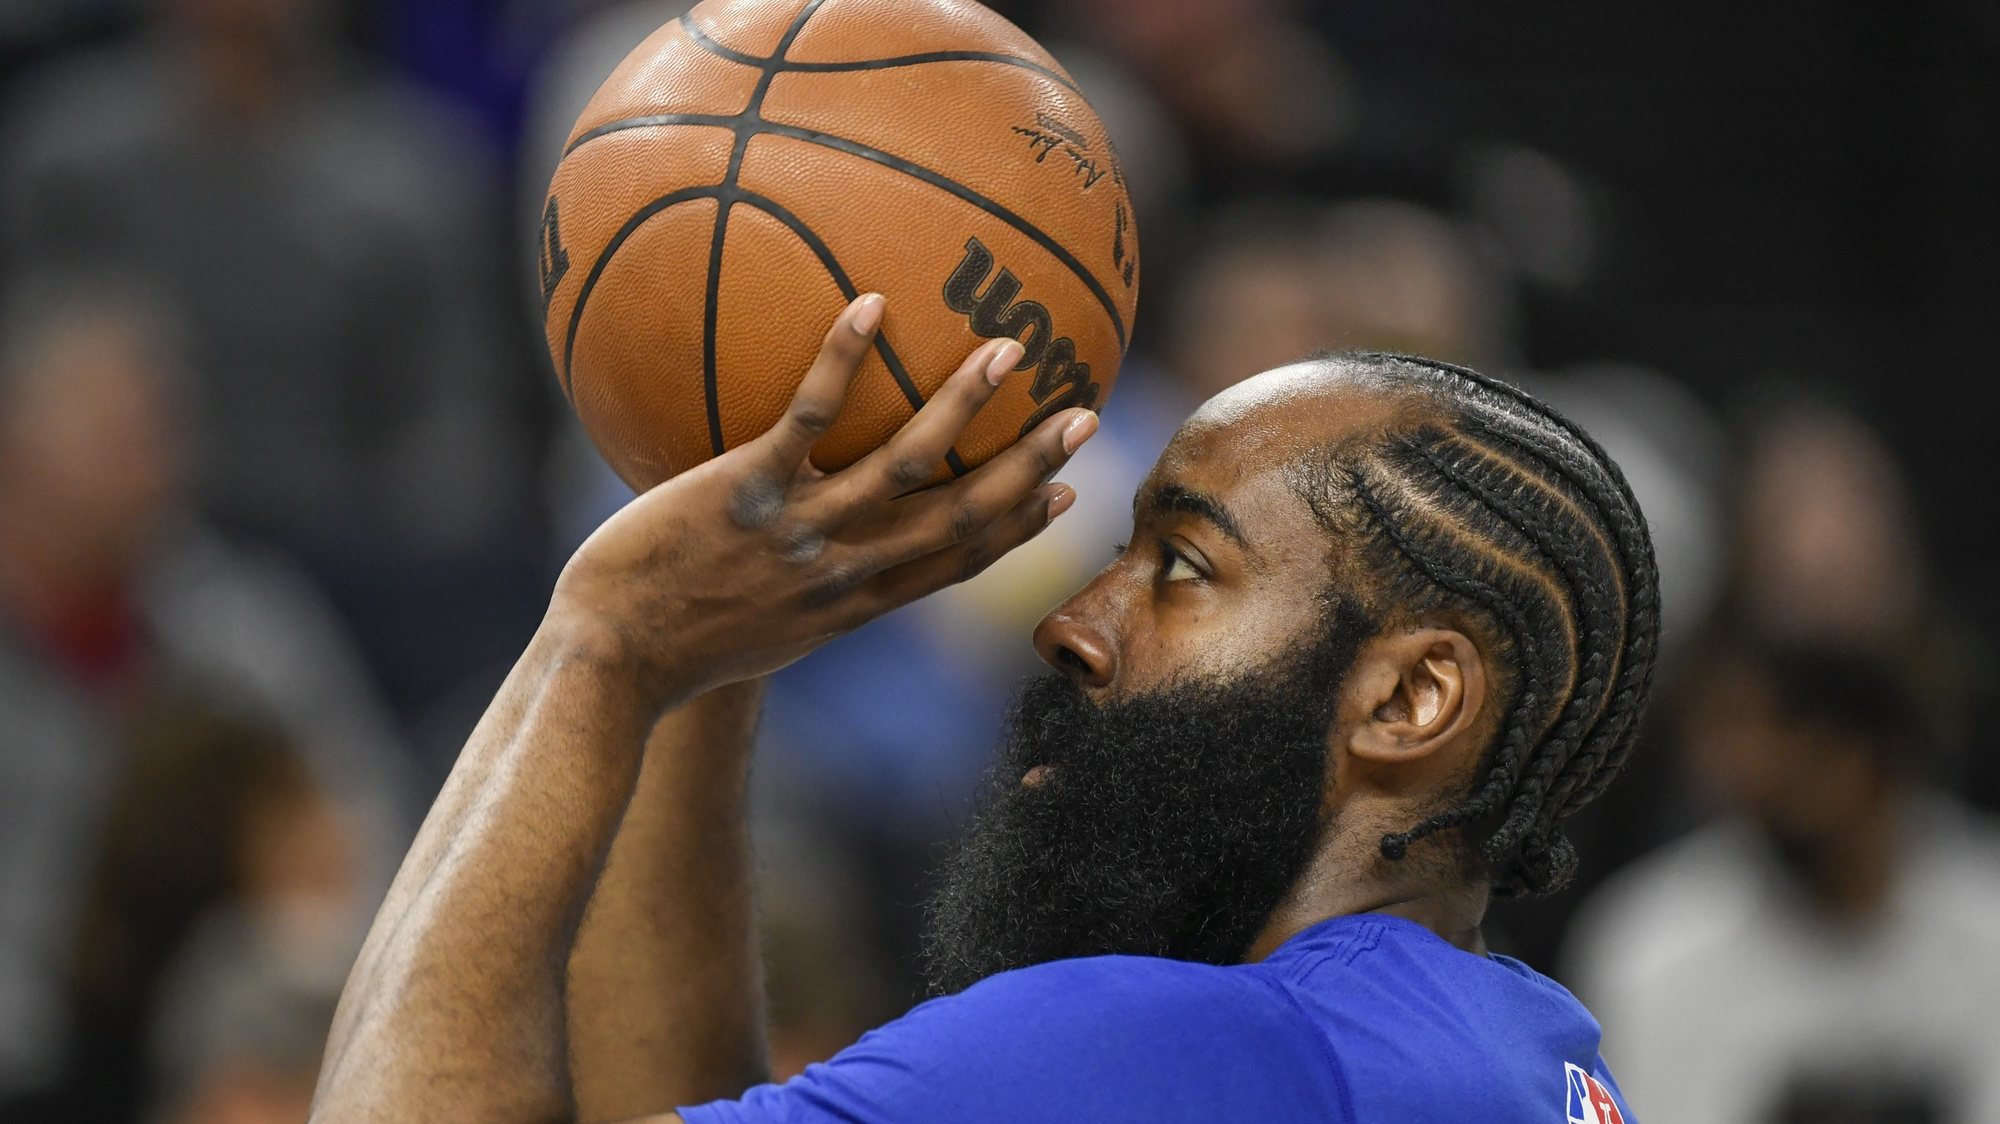 epa09785739 Philadelphia 76ers guard James Harden warms up before the NBA basketball game between the Philadelphia 76ers and the Minnesota Timberwolves at Target Center in Minneapolis, Minnesota, USA, 25 February 2022.  EPA/CRAIG LASSIG  SHUTTERSTOCK OUT